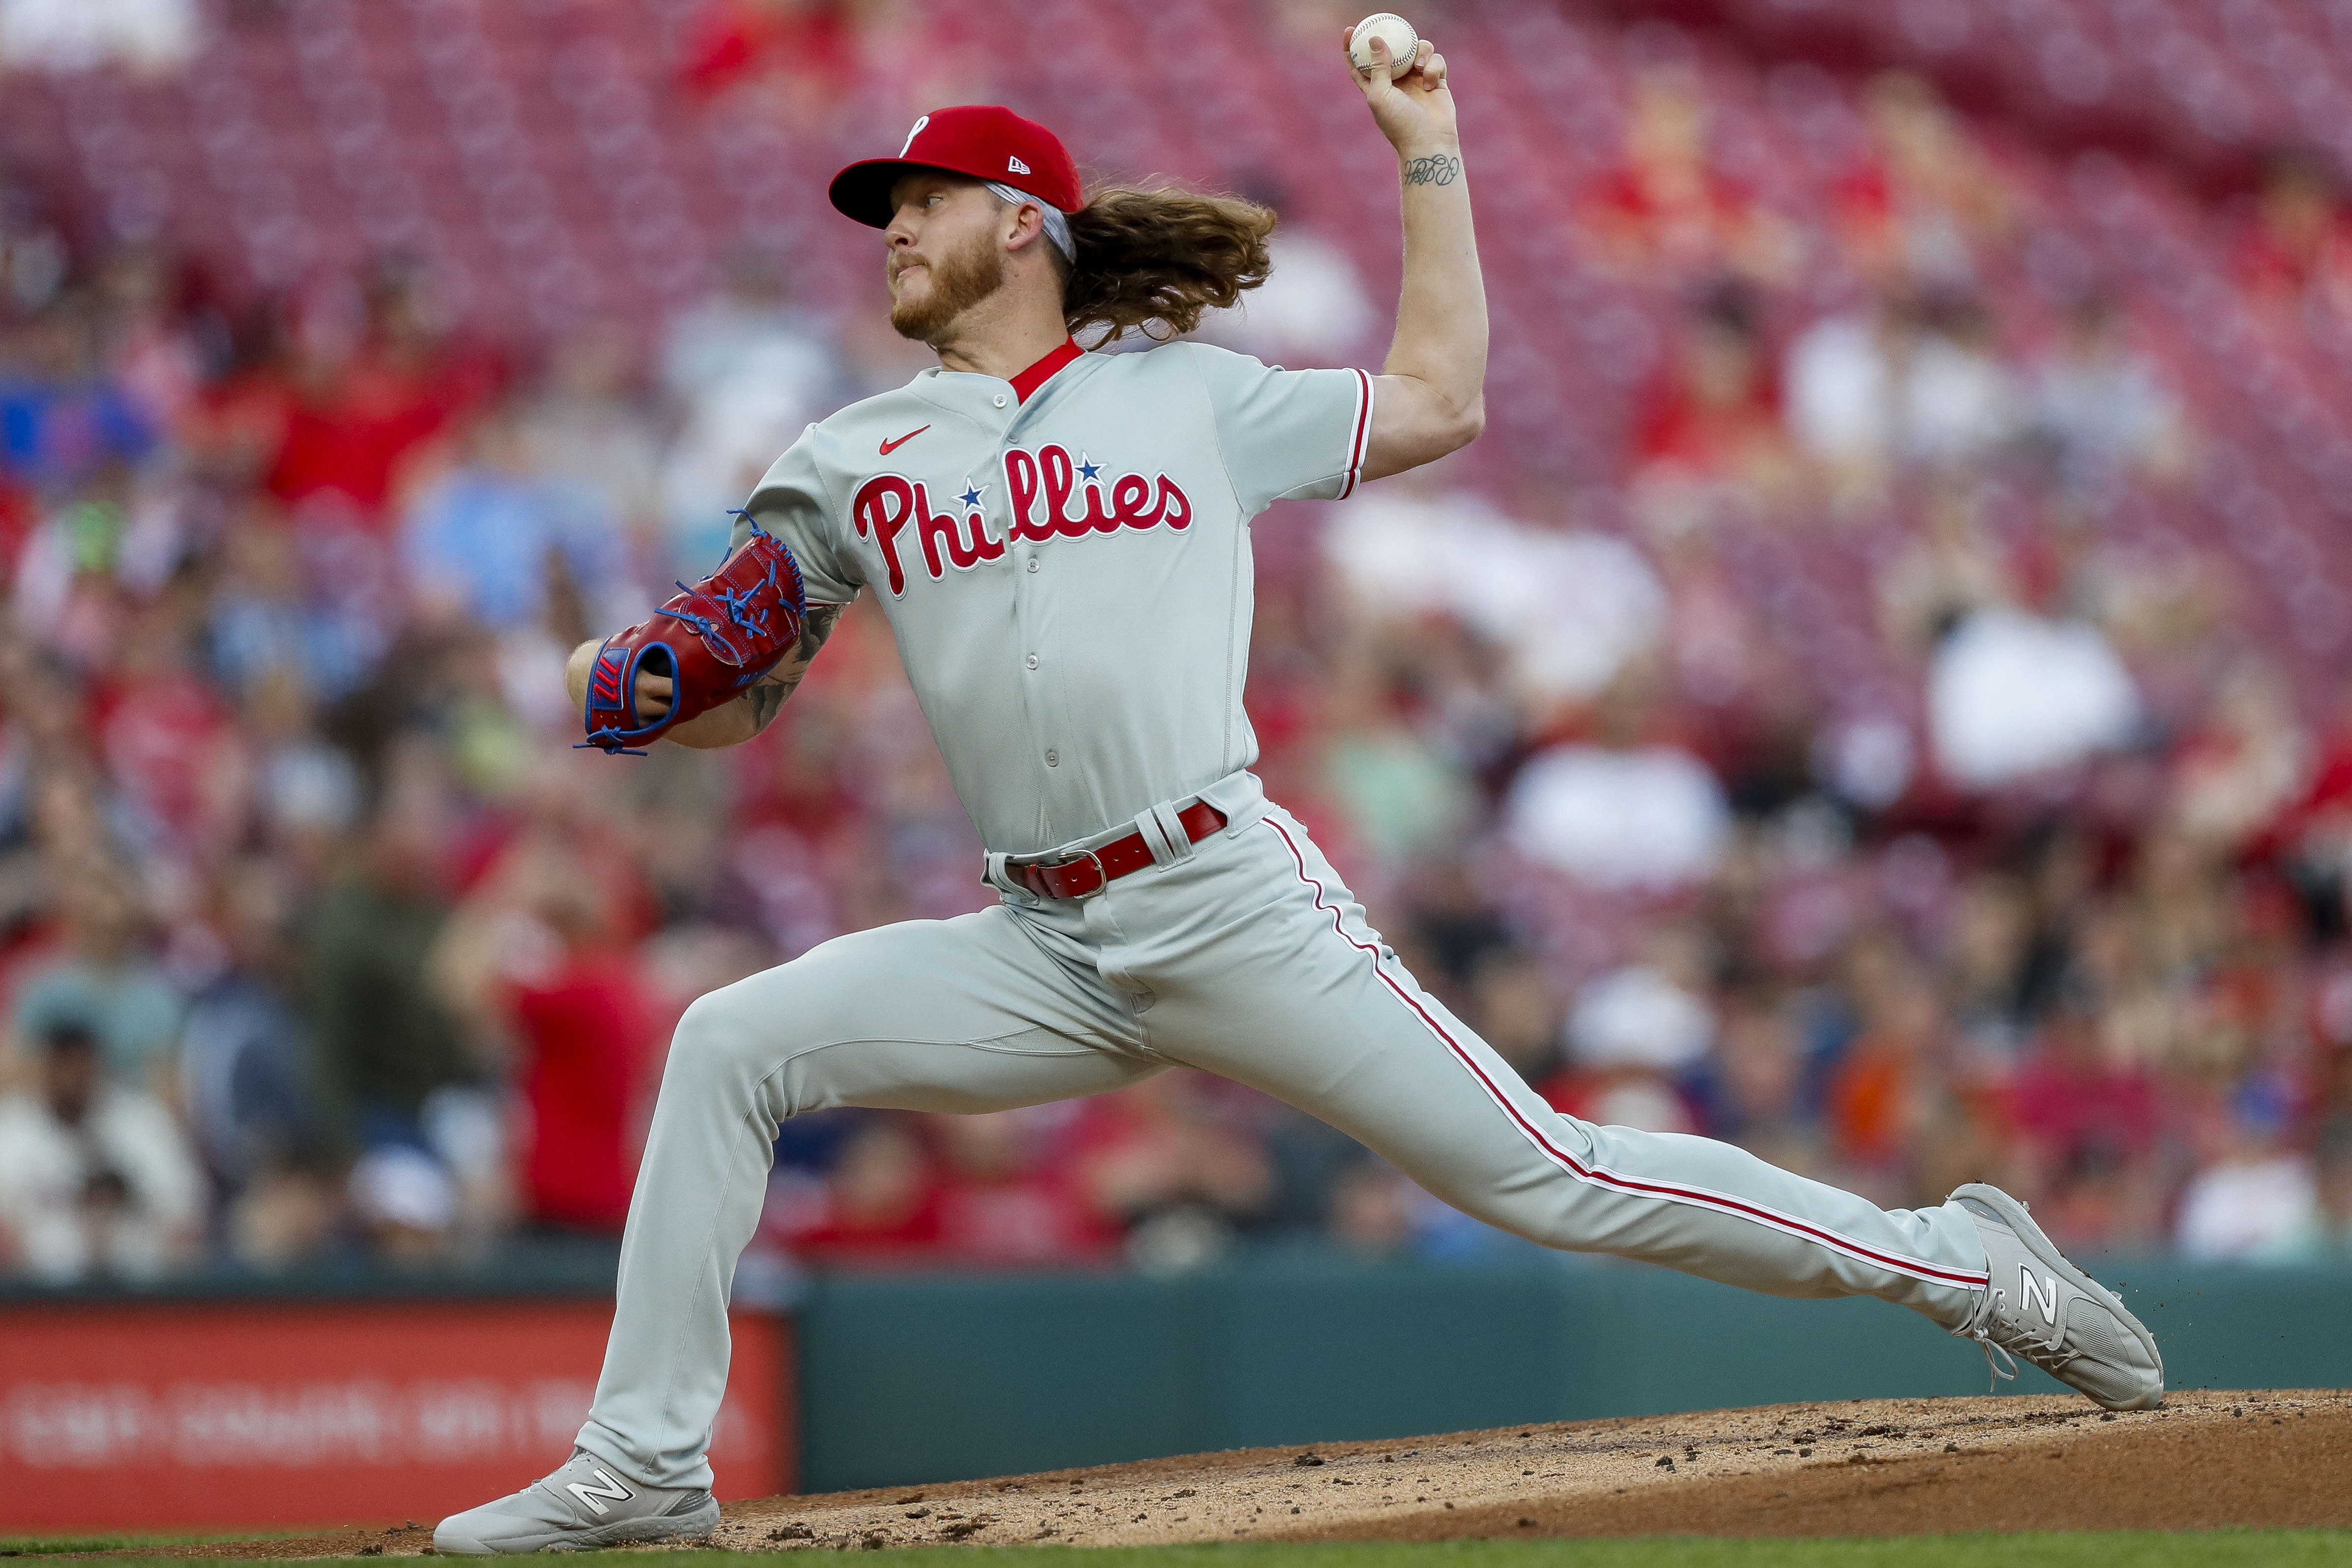 Reds deliver timely hitting to down Phillies